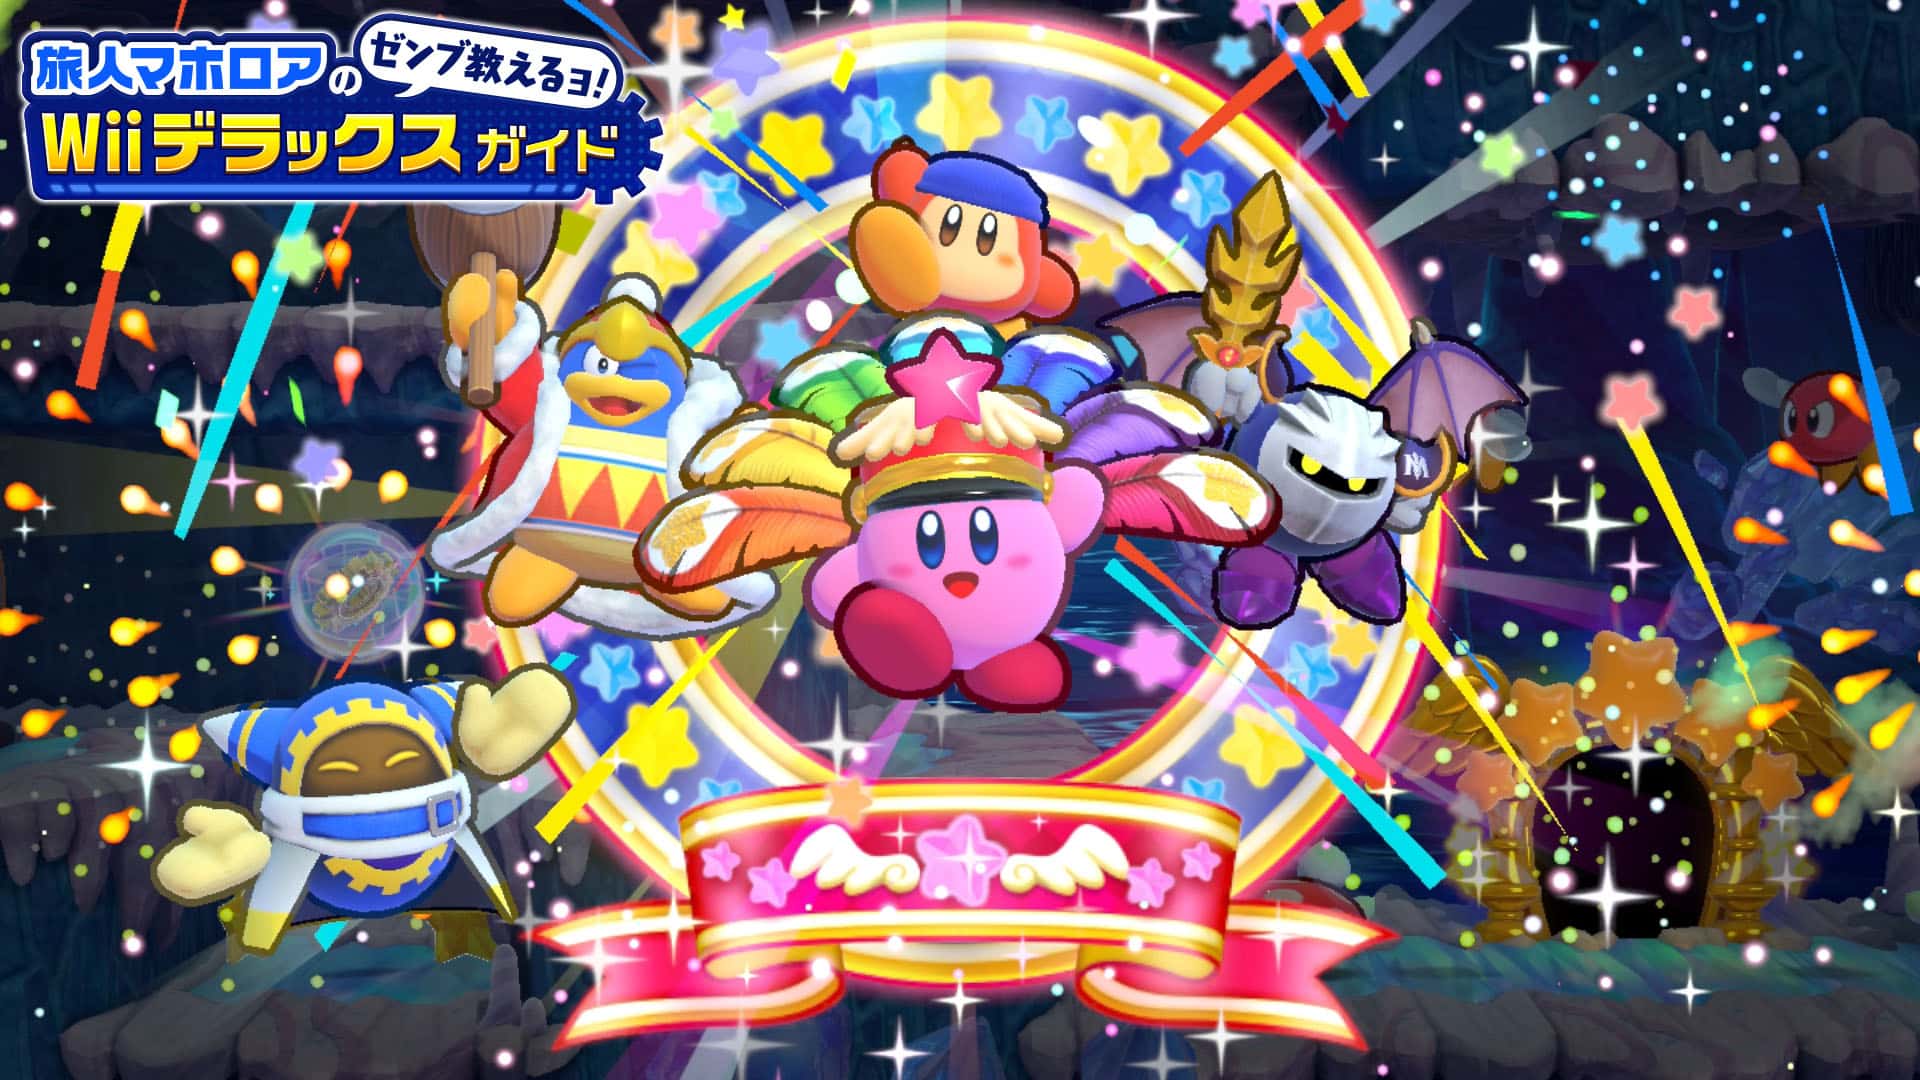 Kirby’s Return to Dream Land Deluxe Showcases New Sand and Festivale Copy Abilities